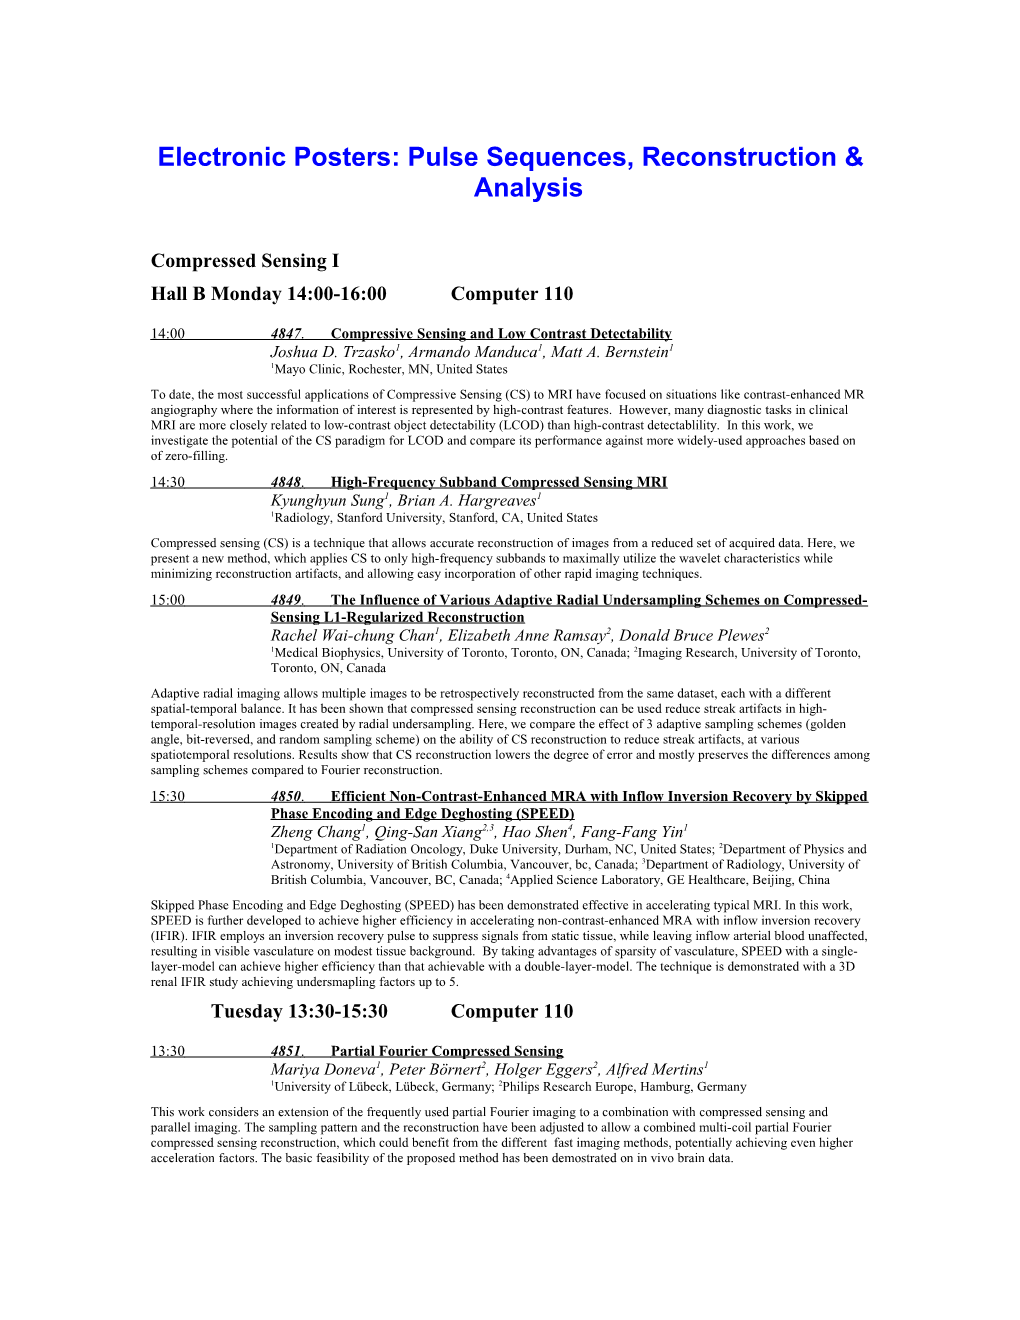 Electronic Posters: Pulse Sequences, Reconstruction & Analysis